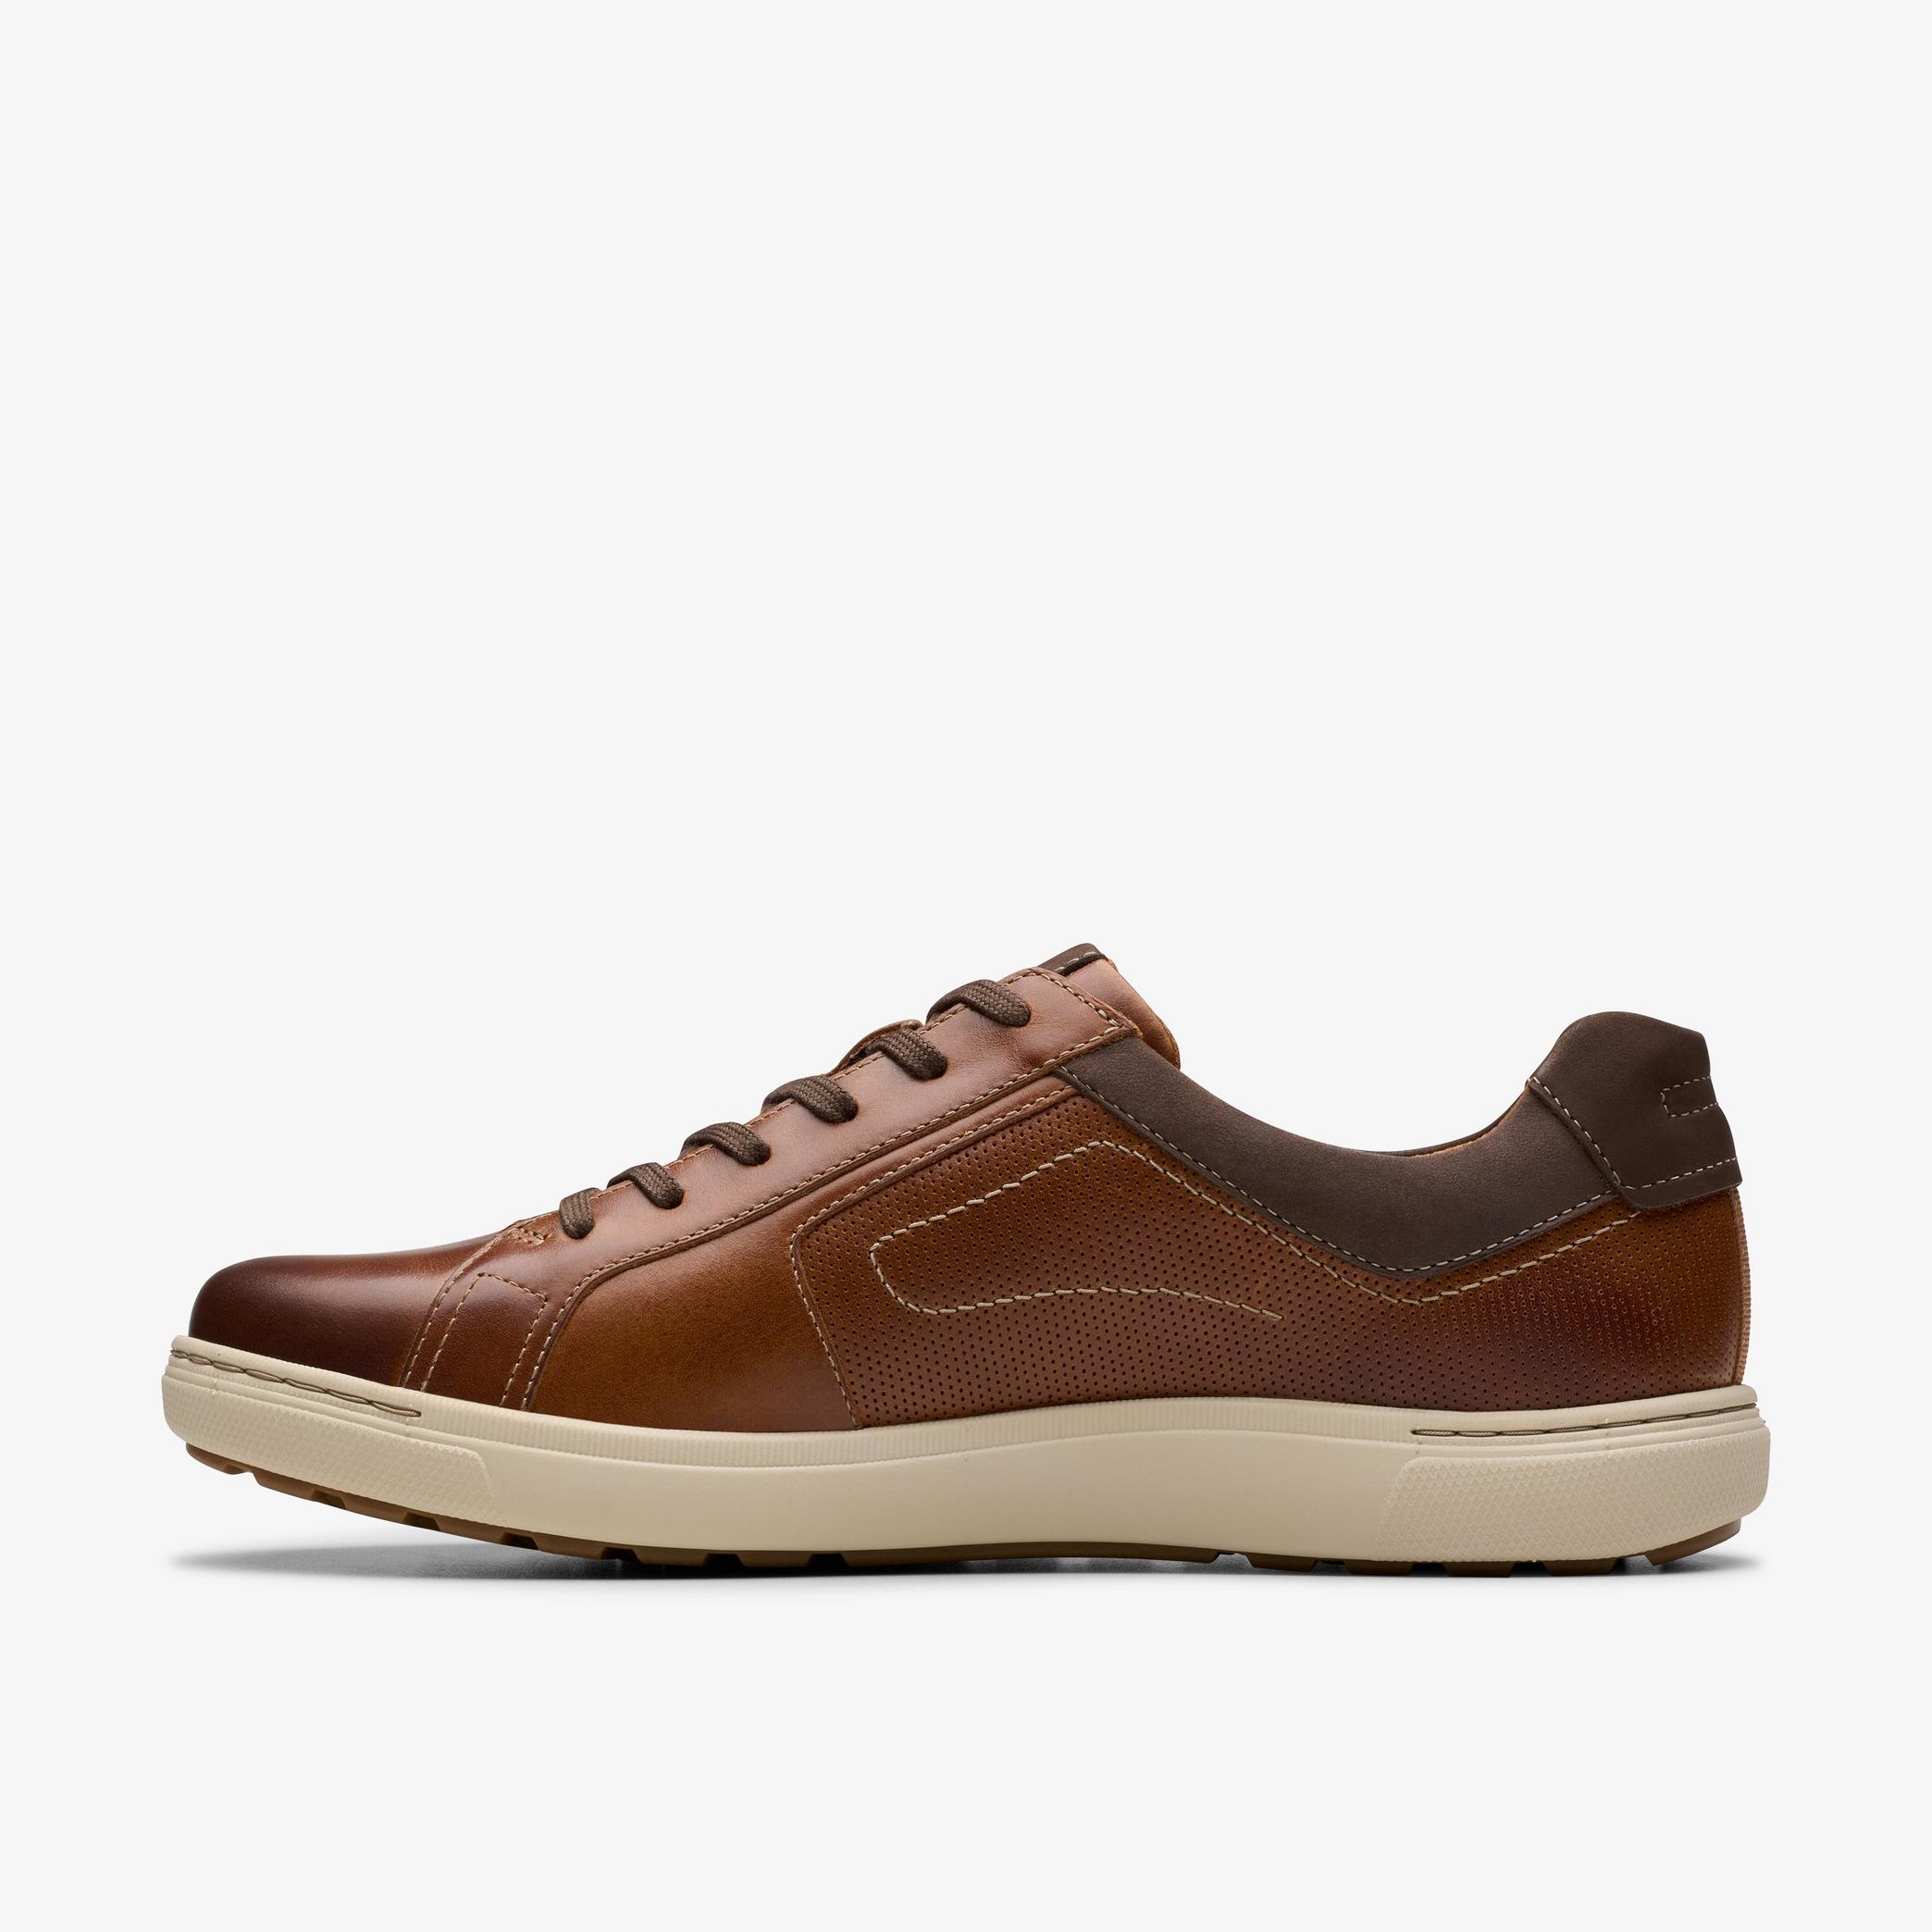 Mapstone Lace Tan Leather Sneakers, view 2 of 6